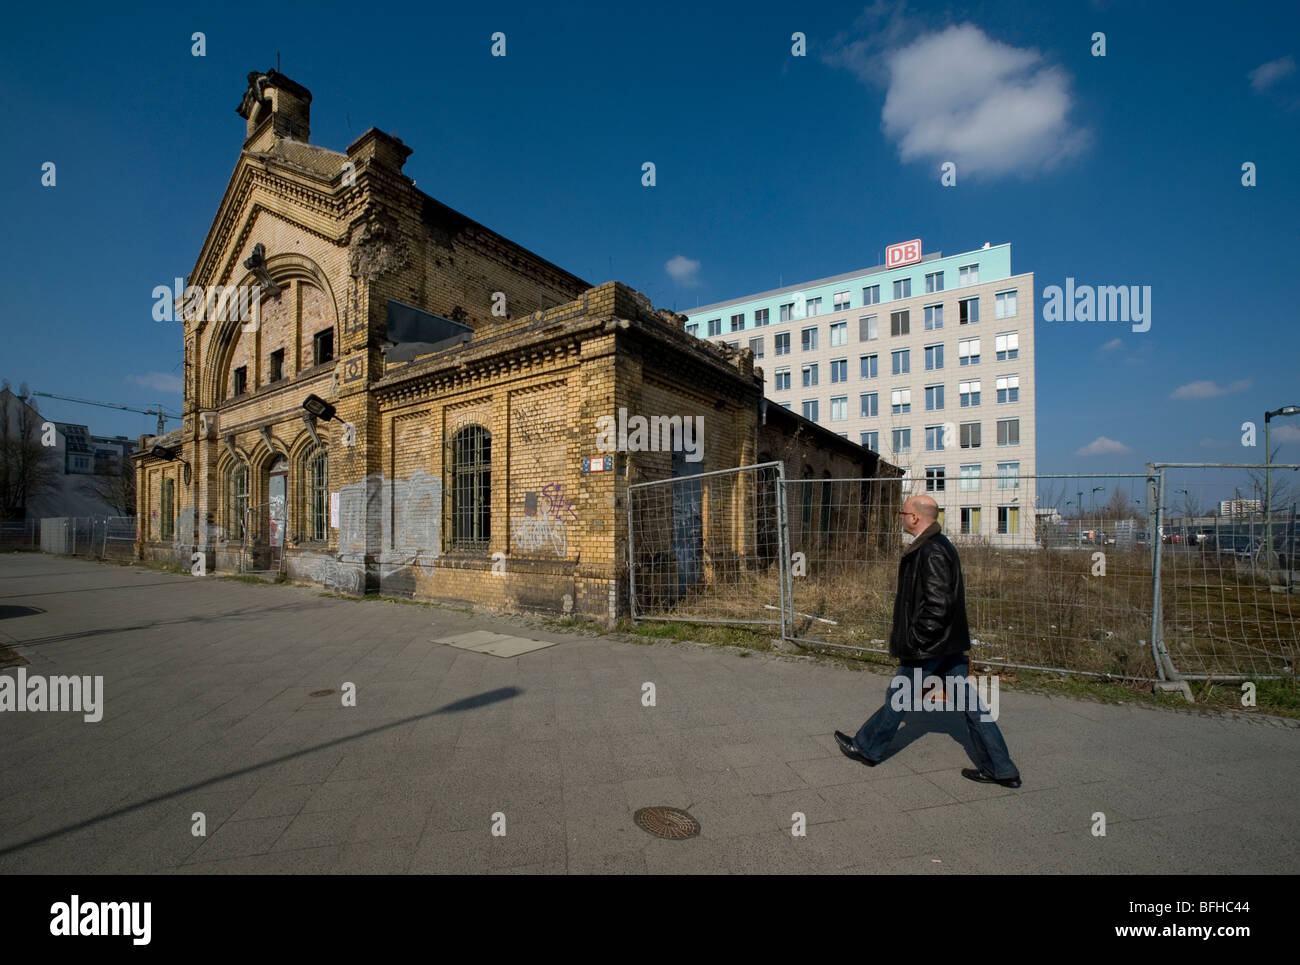 Berlin 2009,Old building, death strip,,1989 DDR Germany Unified positive forward history War Cold War end East West Divide city Stock Photo